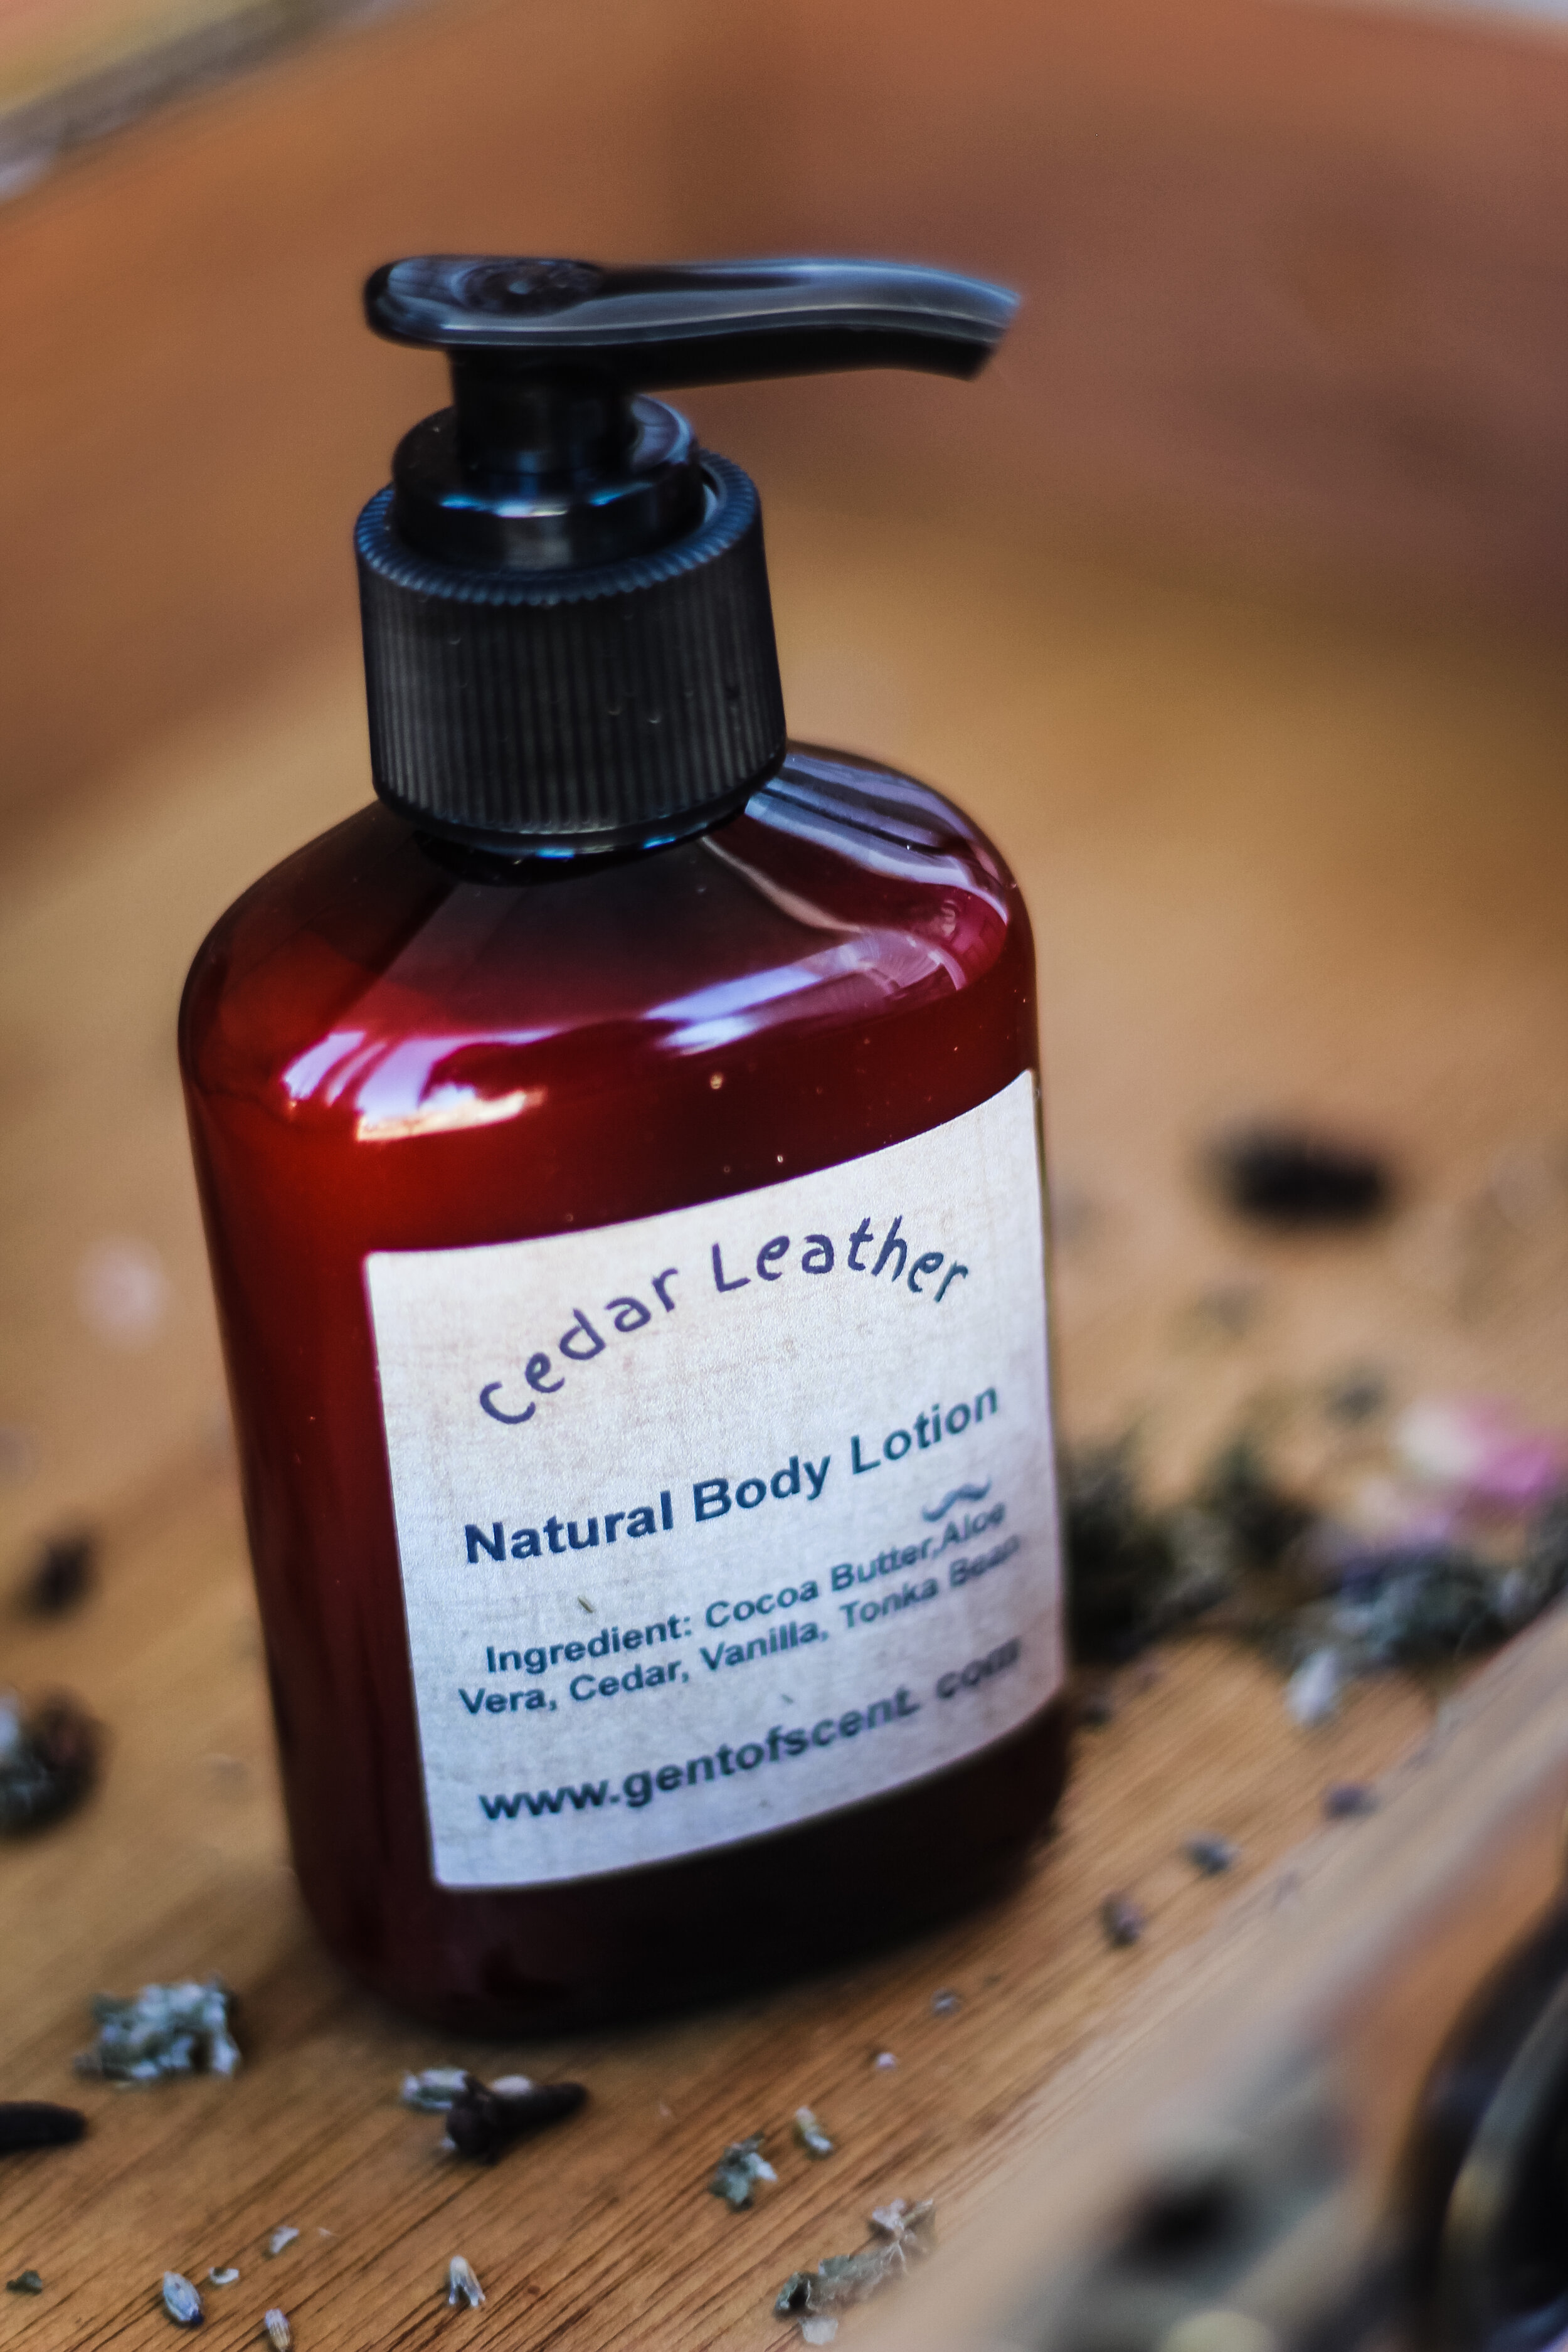 Cedar Leather Essential Oil Based Lotion — The Gent of Scent